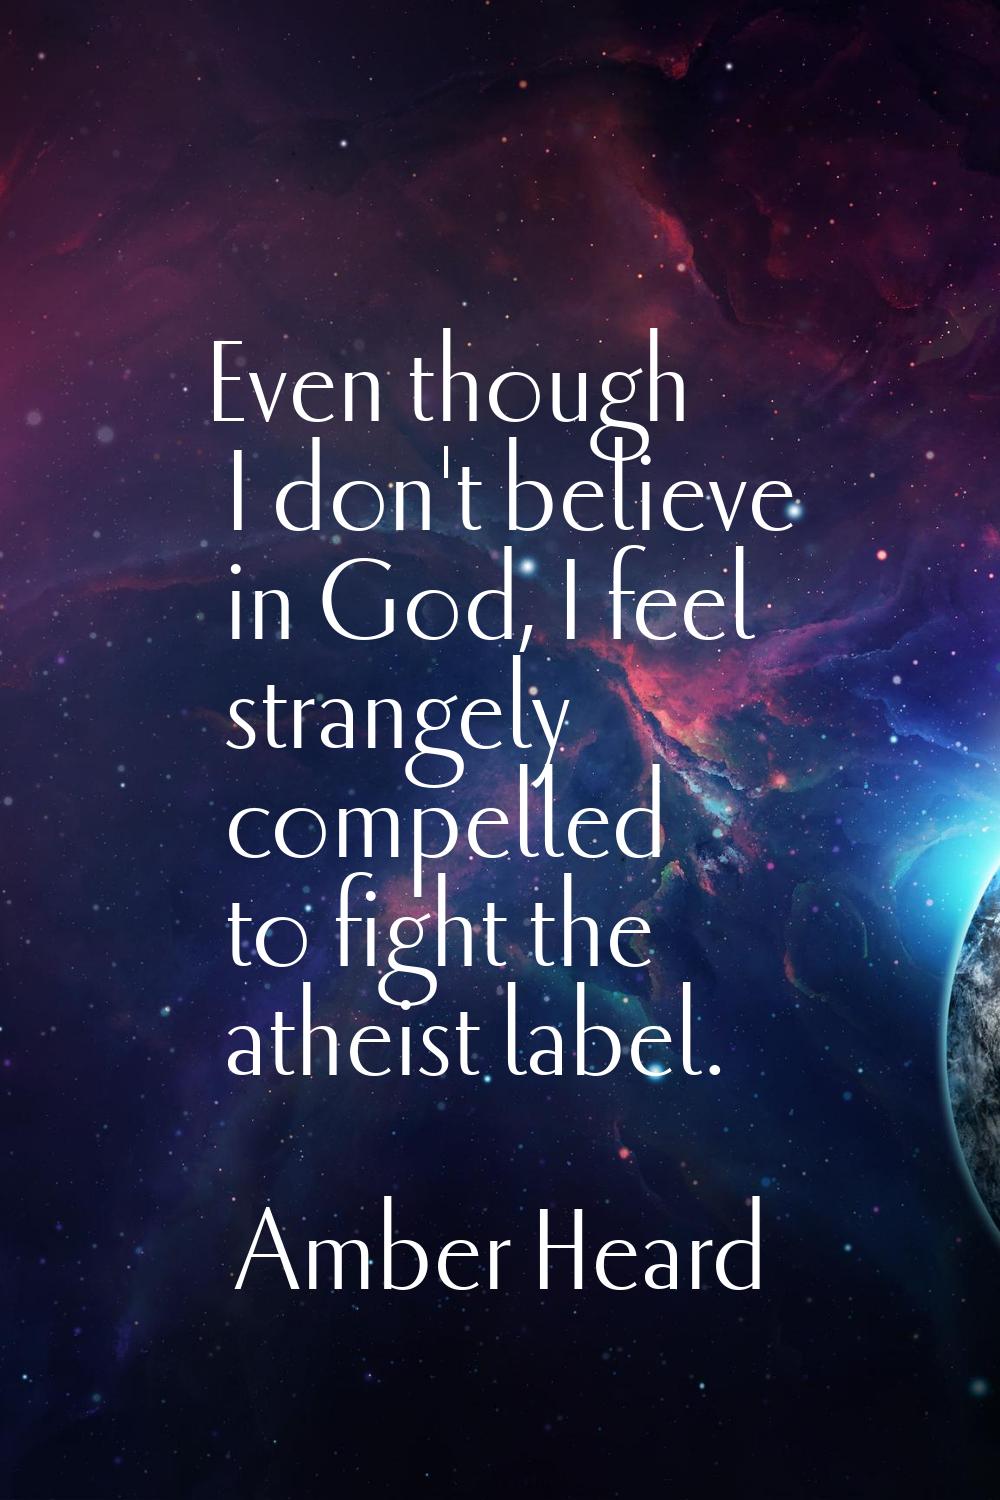 Even though I don't believe in God, I feel strangely compelled to fight the atheist label.